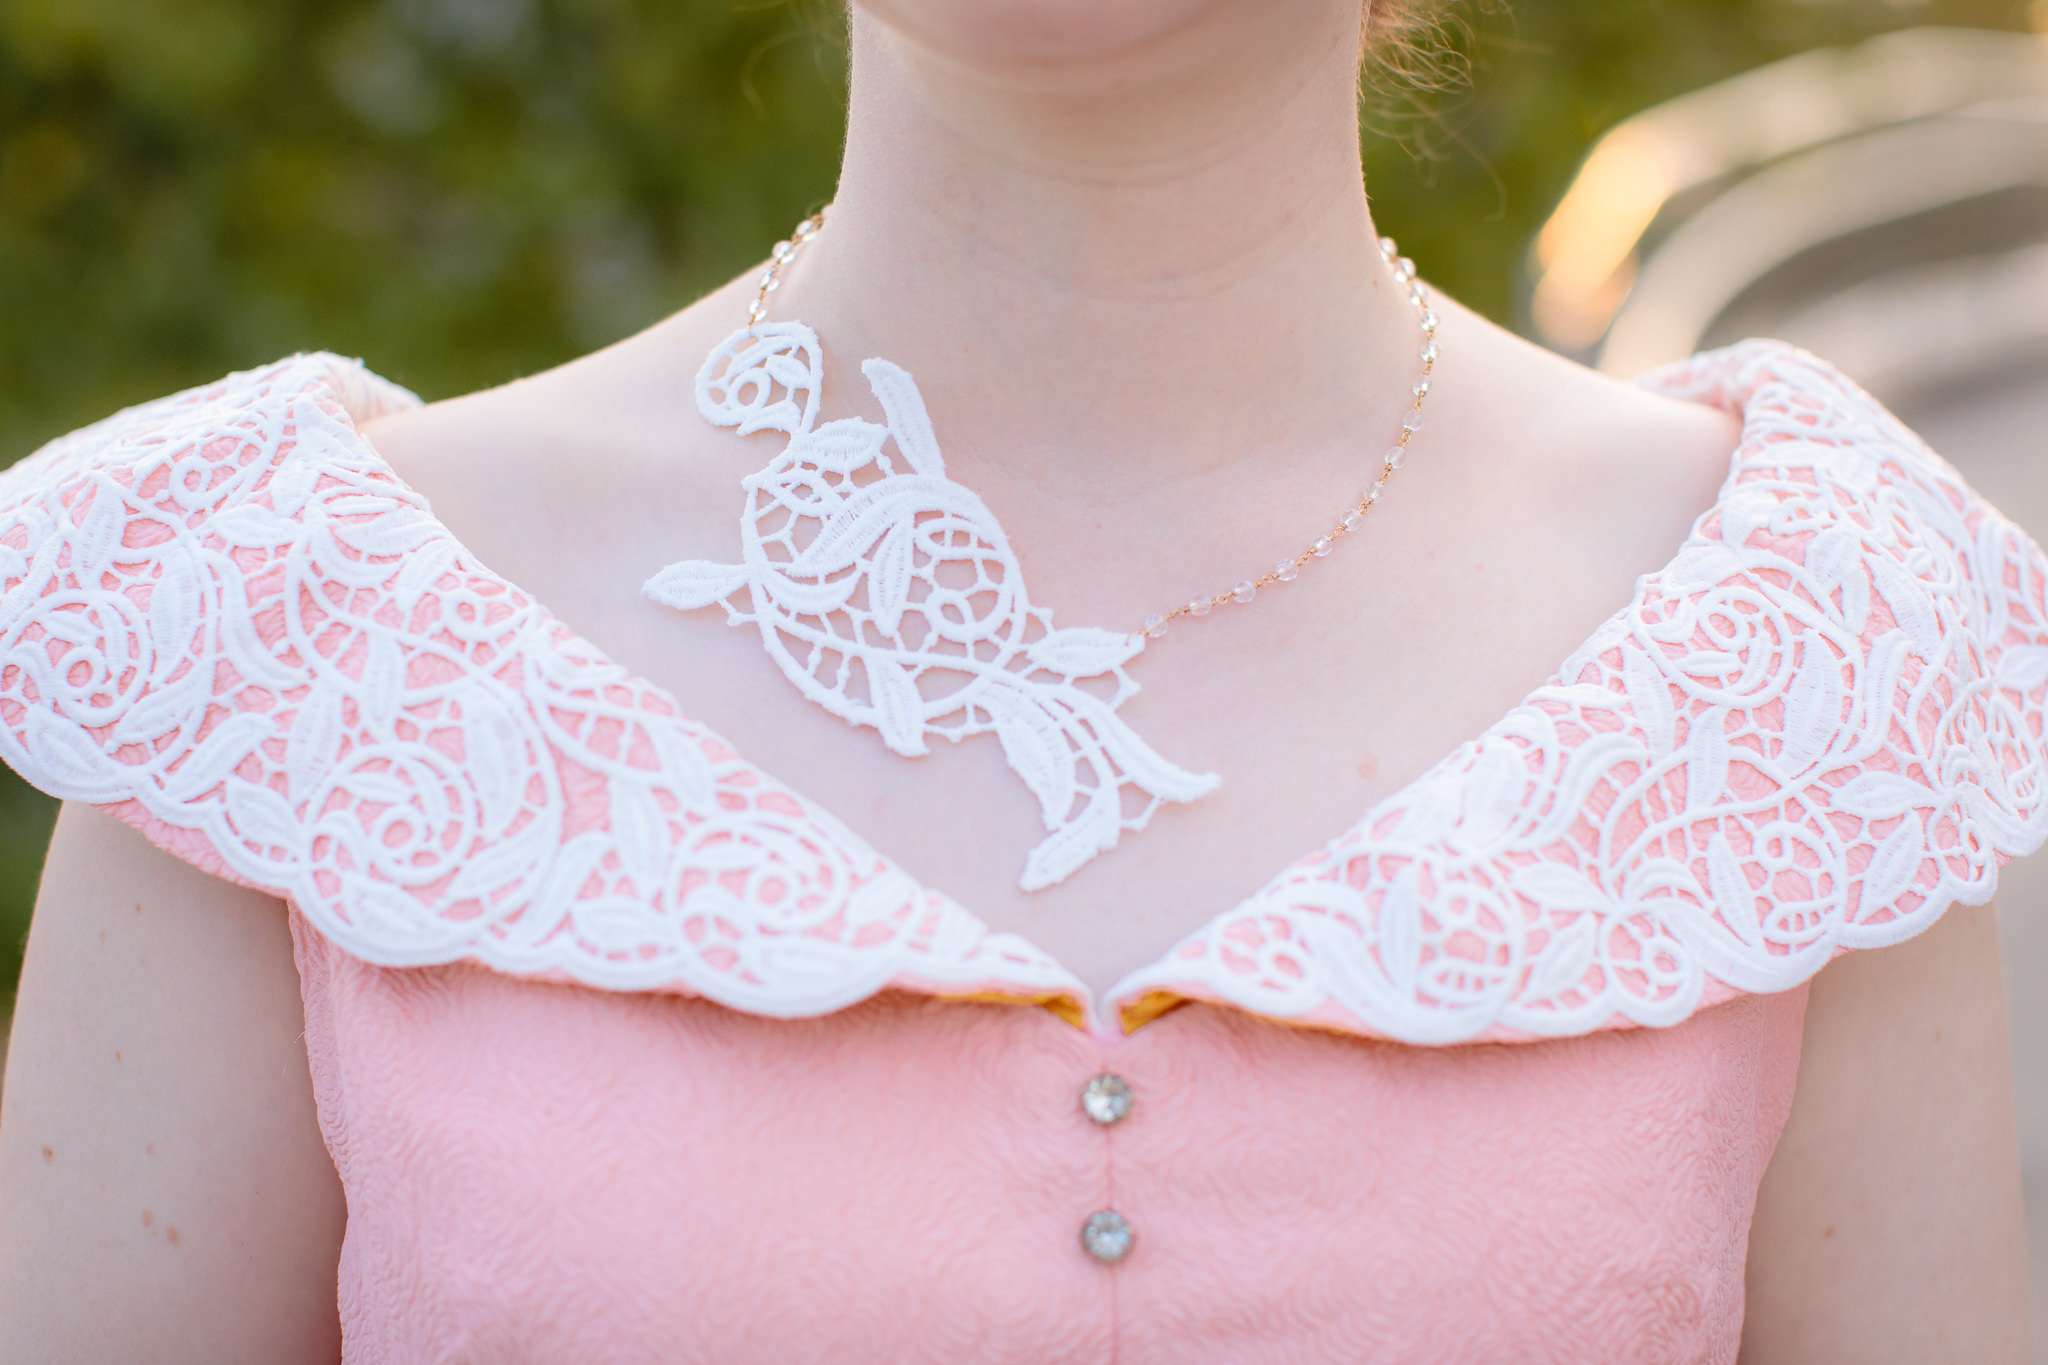 Lace details of the bride's custom-made pink dress at Phipps Conservatory